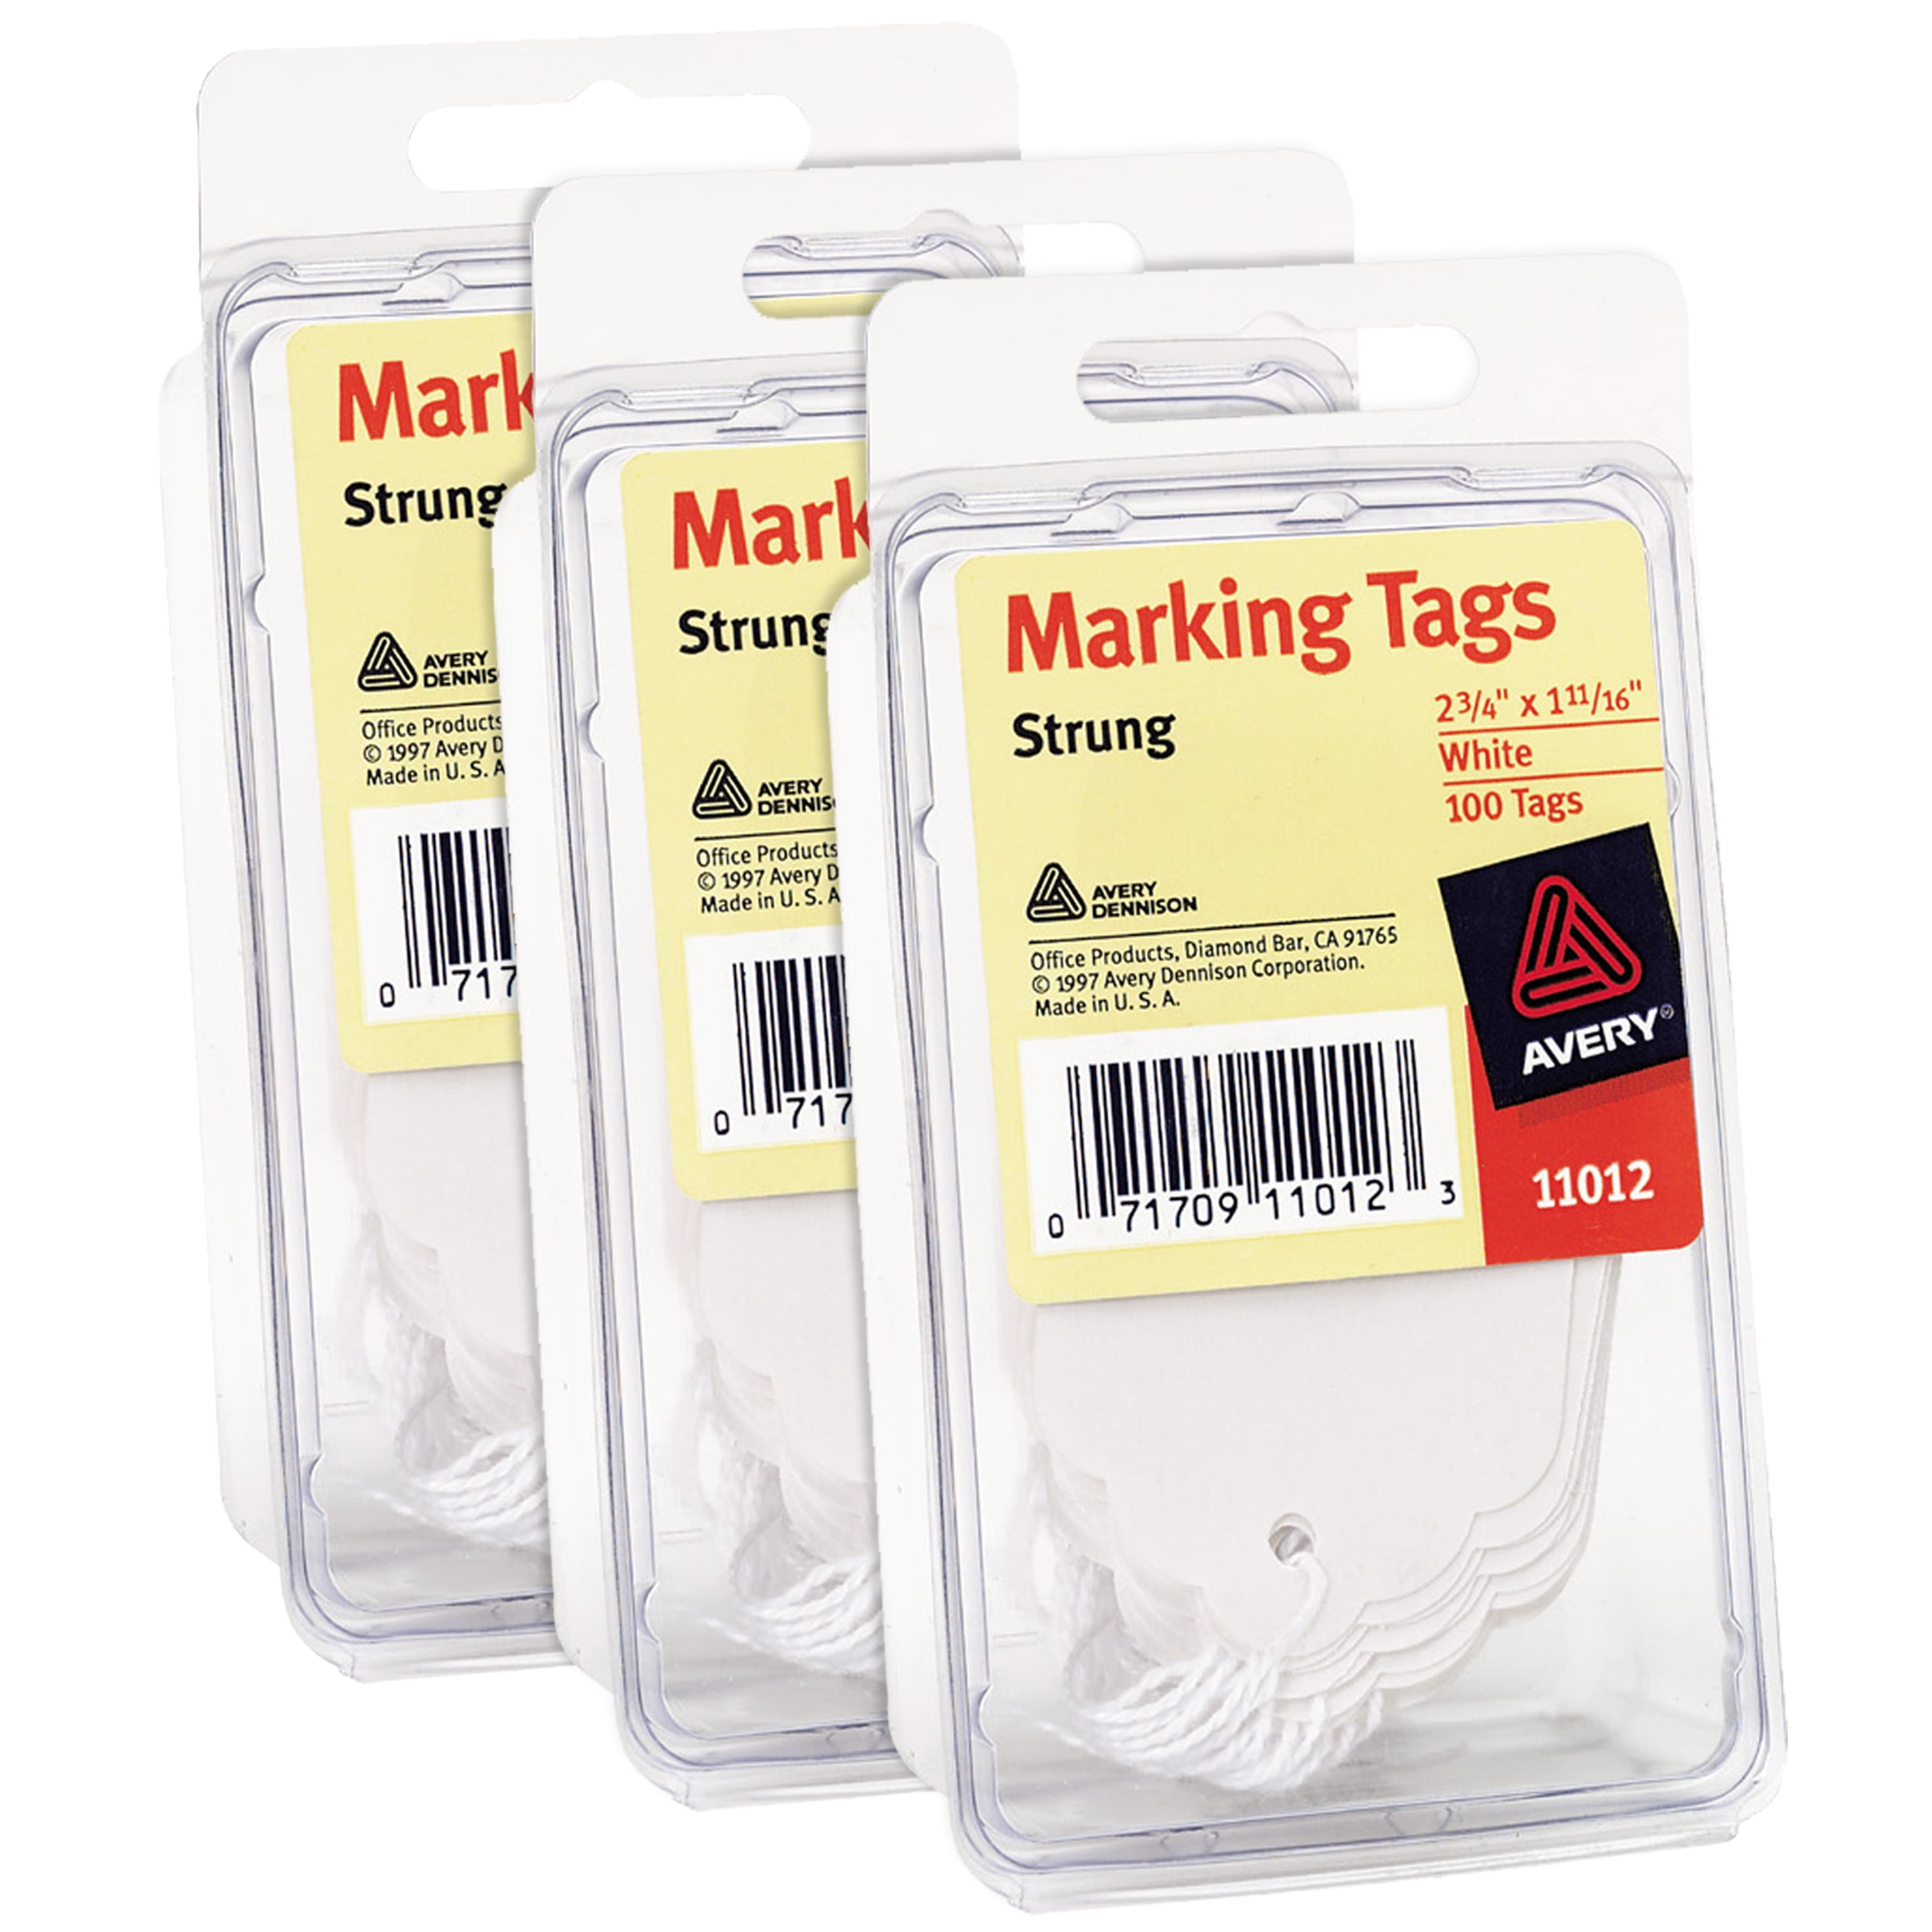 Taihexin 500 Pcs Price Tags with String Attached, White Marking Tags, Price  Labels Display Tags, Marking Strung Writable Tags for Product Jewelry  Clothing Tags,1.38*0.87 inches(White) 